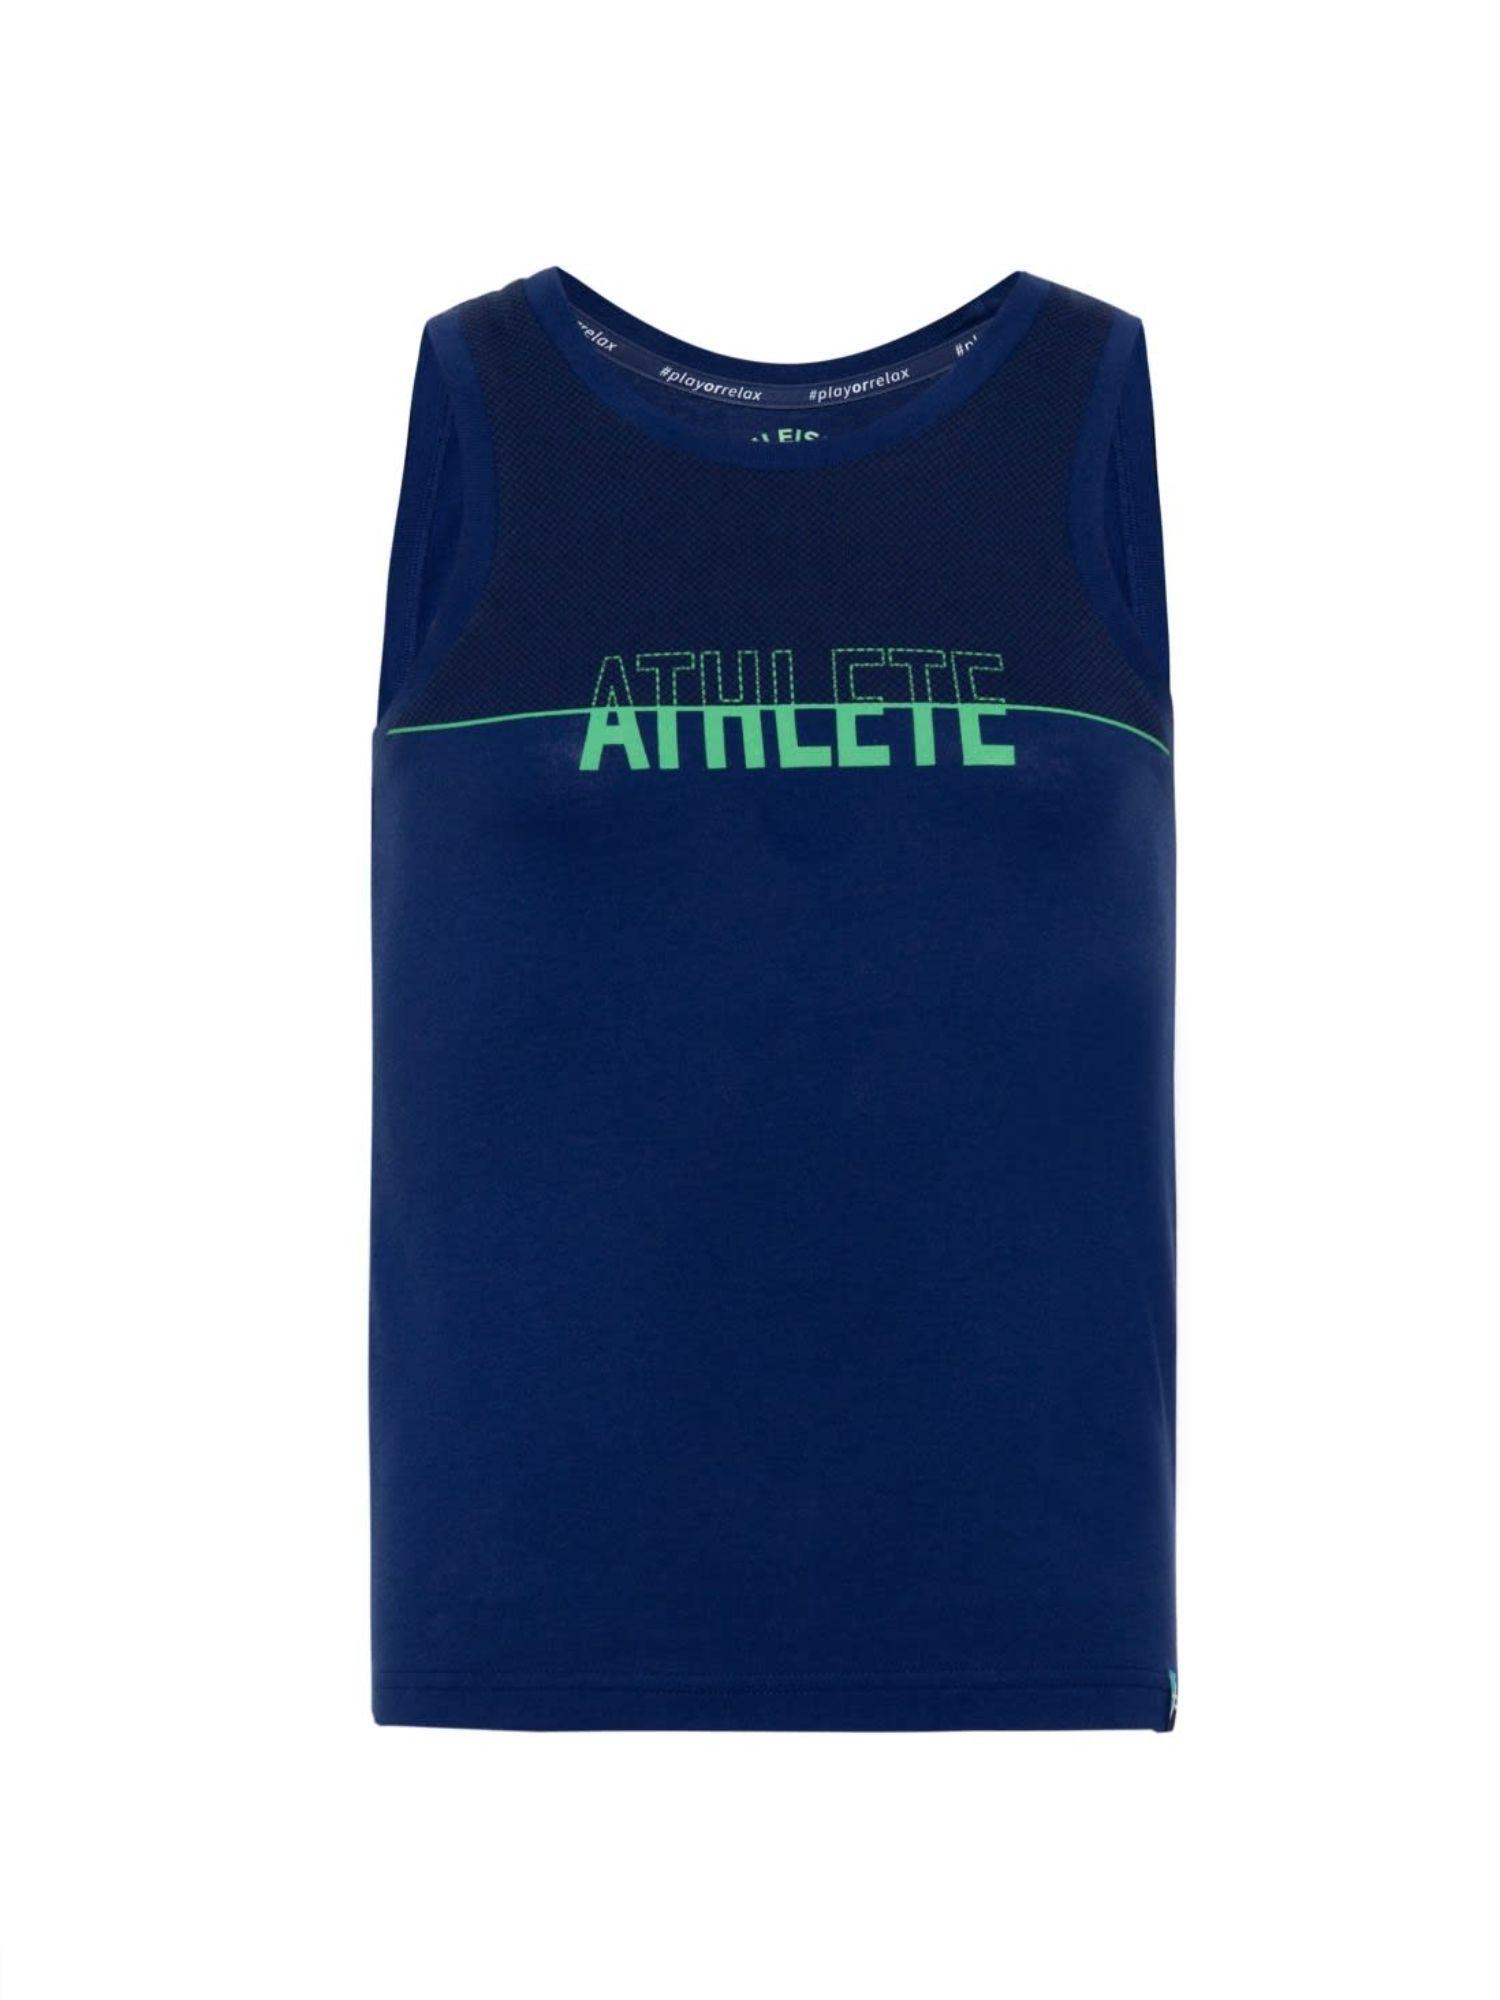 blue depth printed muscle tee - style number - (ab14)